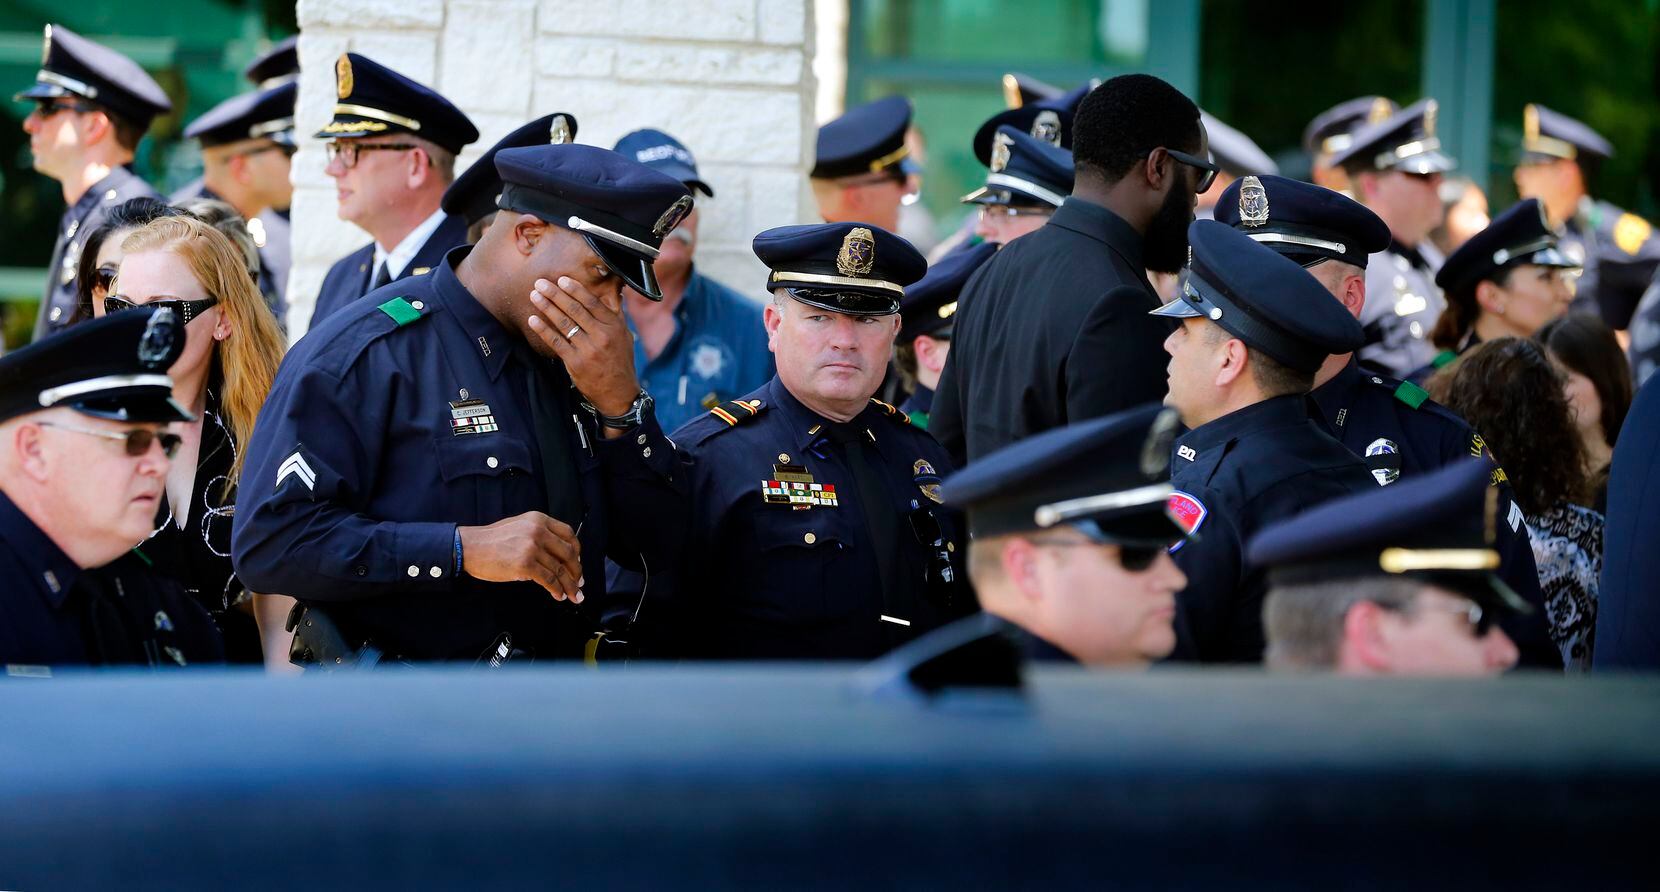 Police officers broke salute and mingled a bit before the hearse and the funeral procession...